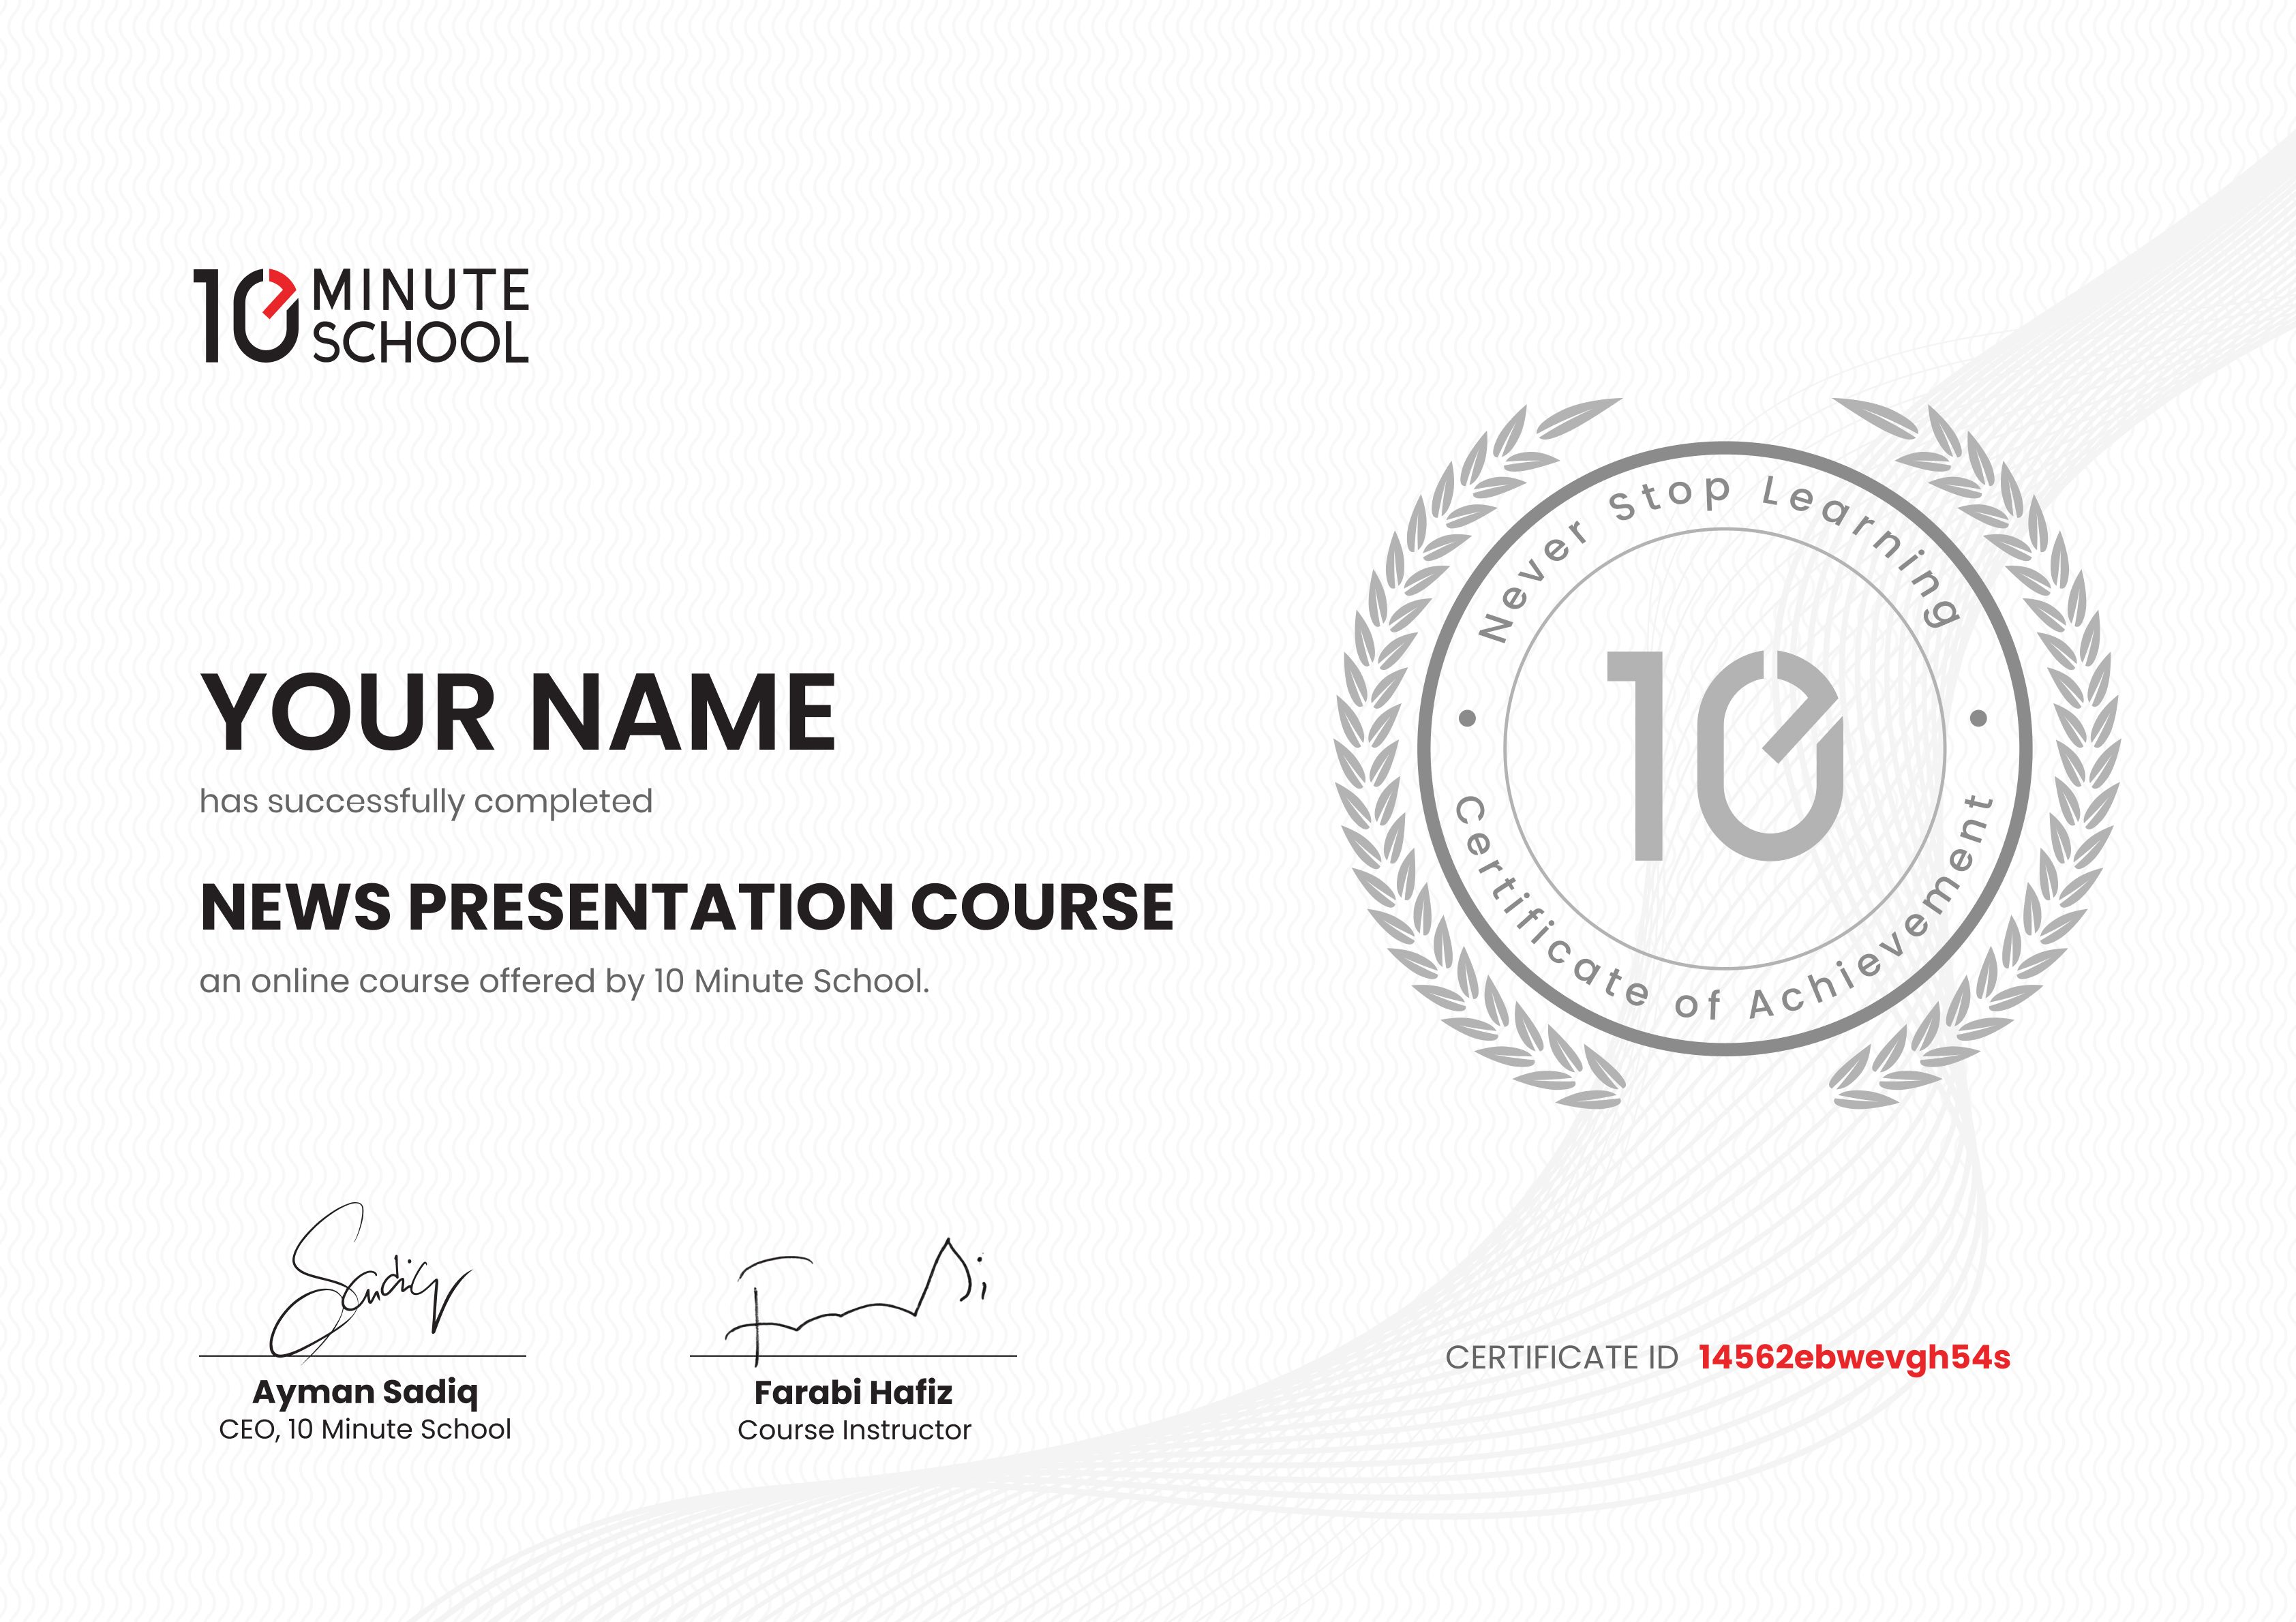 Certificate for News Presentation Course